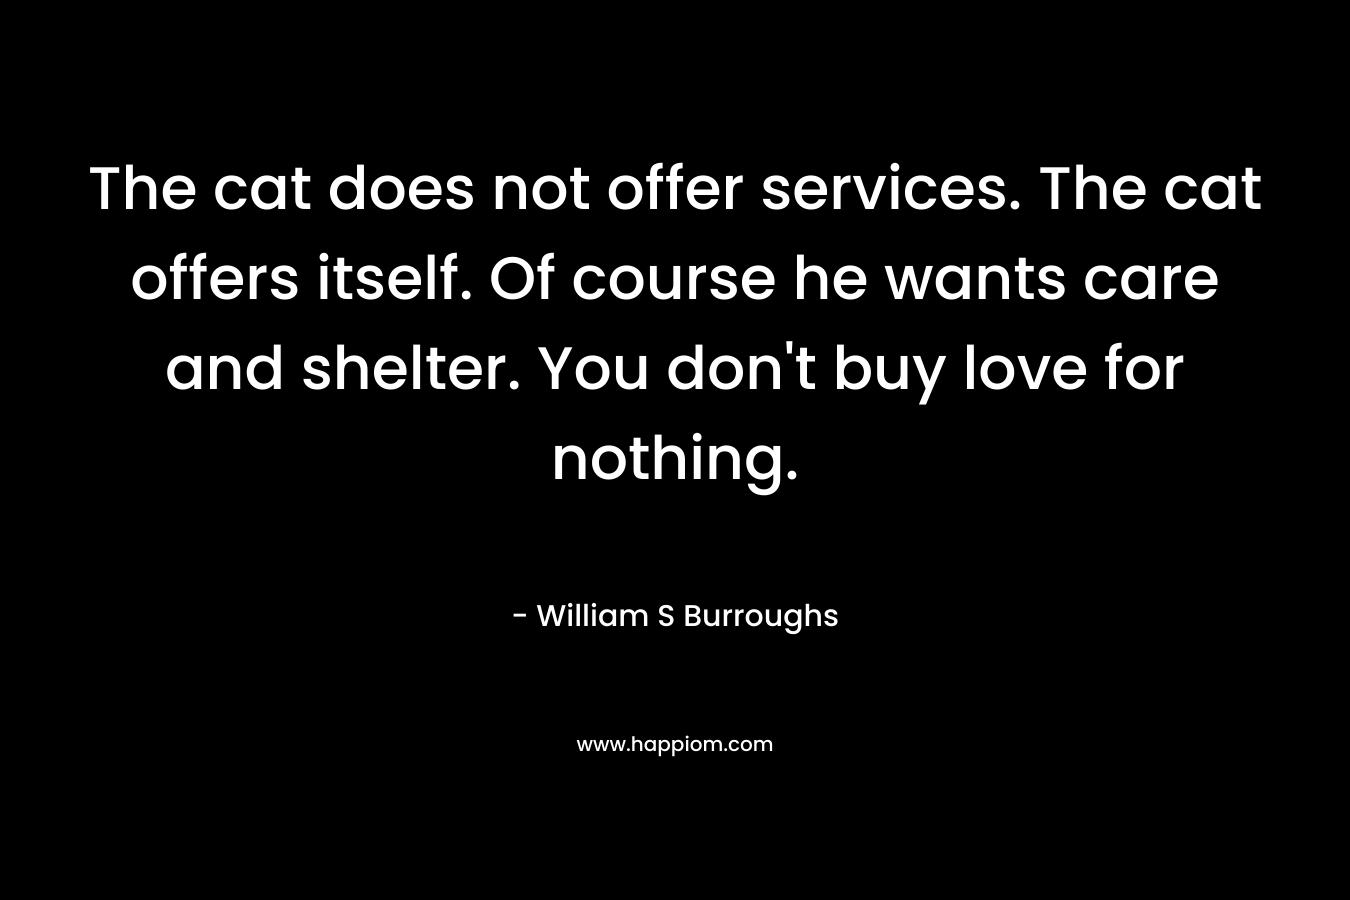 The cat does not offer services. The cat offers itself. Of course he wants care and shelter. You don’t buy love for nothing. – William S Burroughs